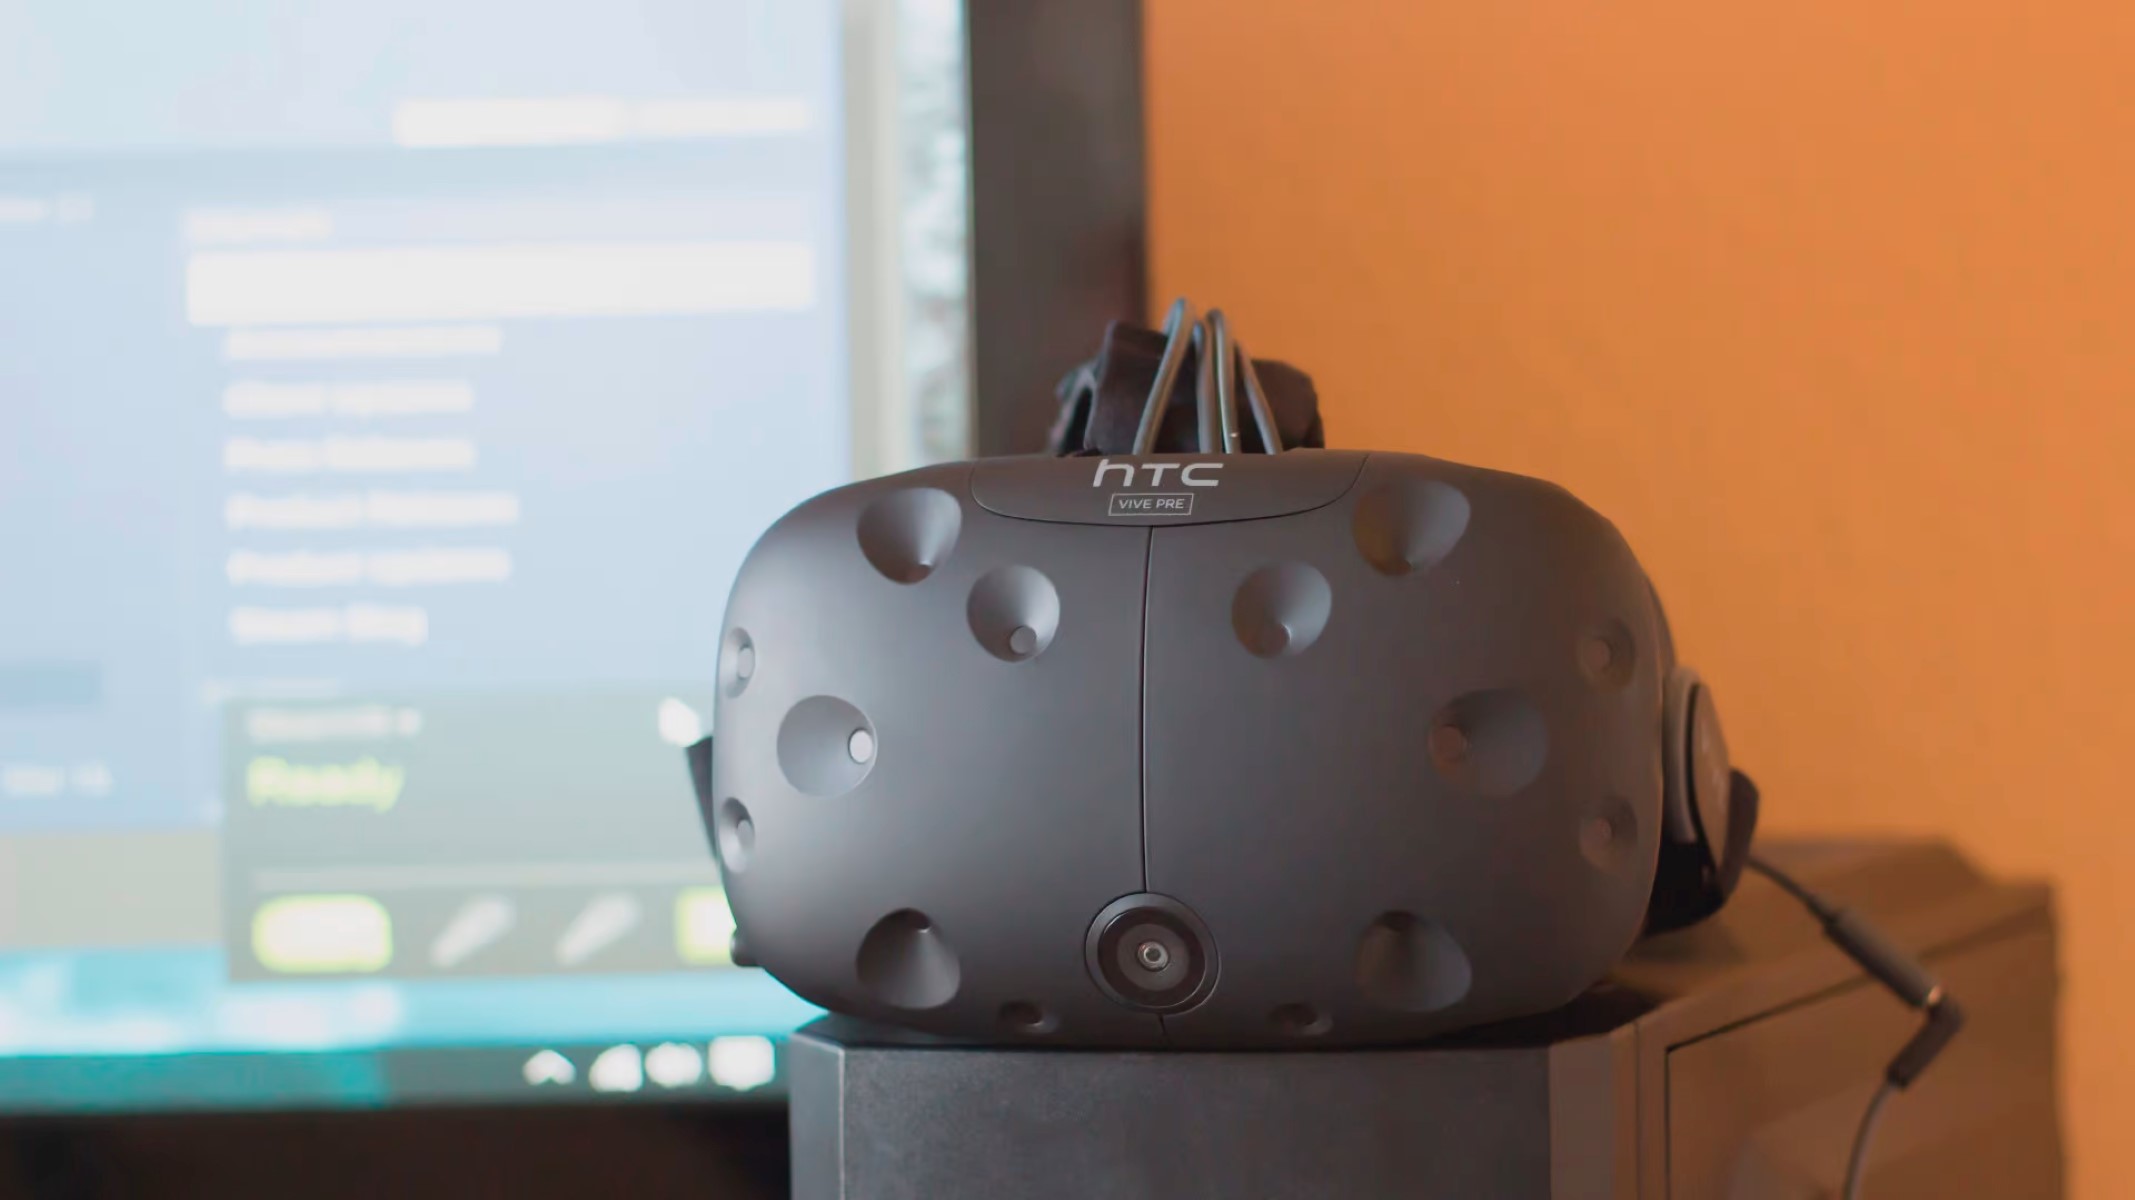 How To Mount HTC Vive System Without Screws In The Wall